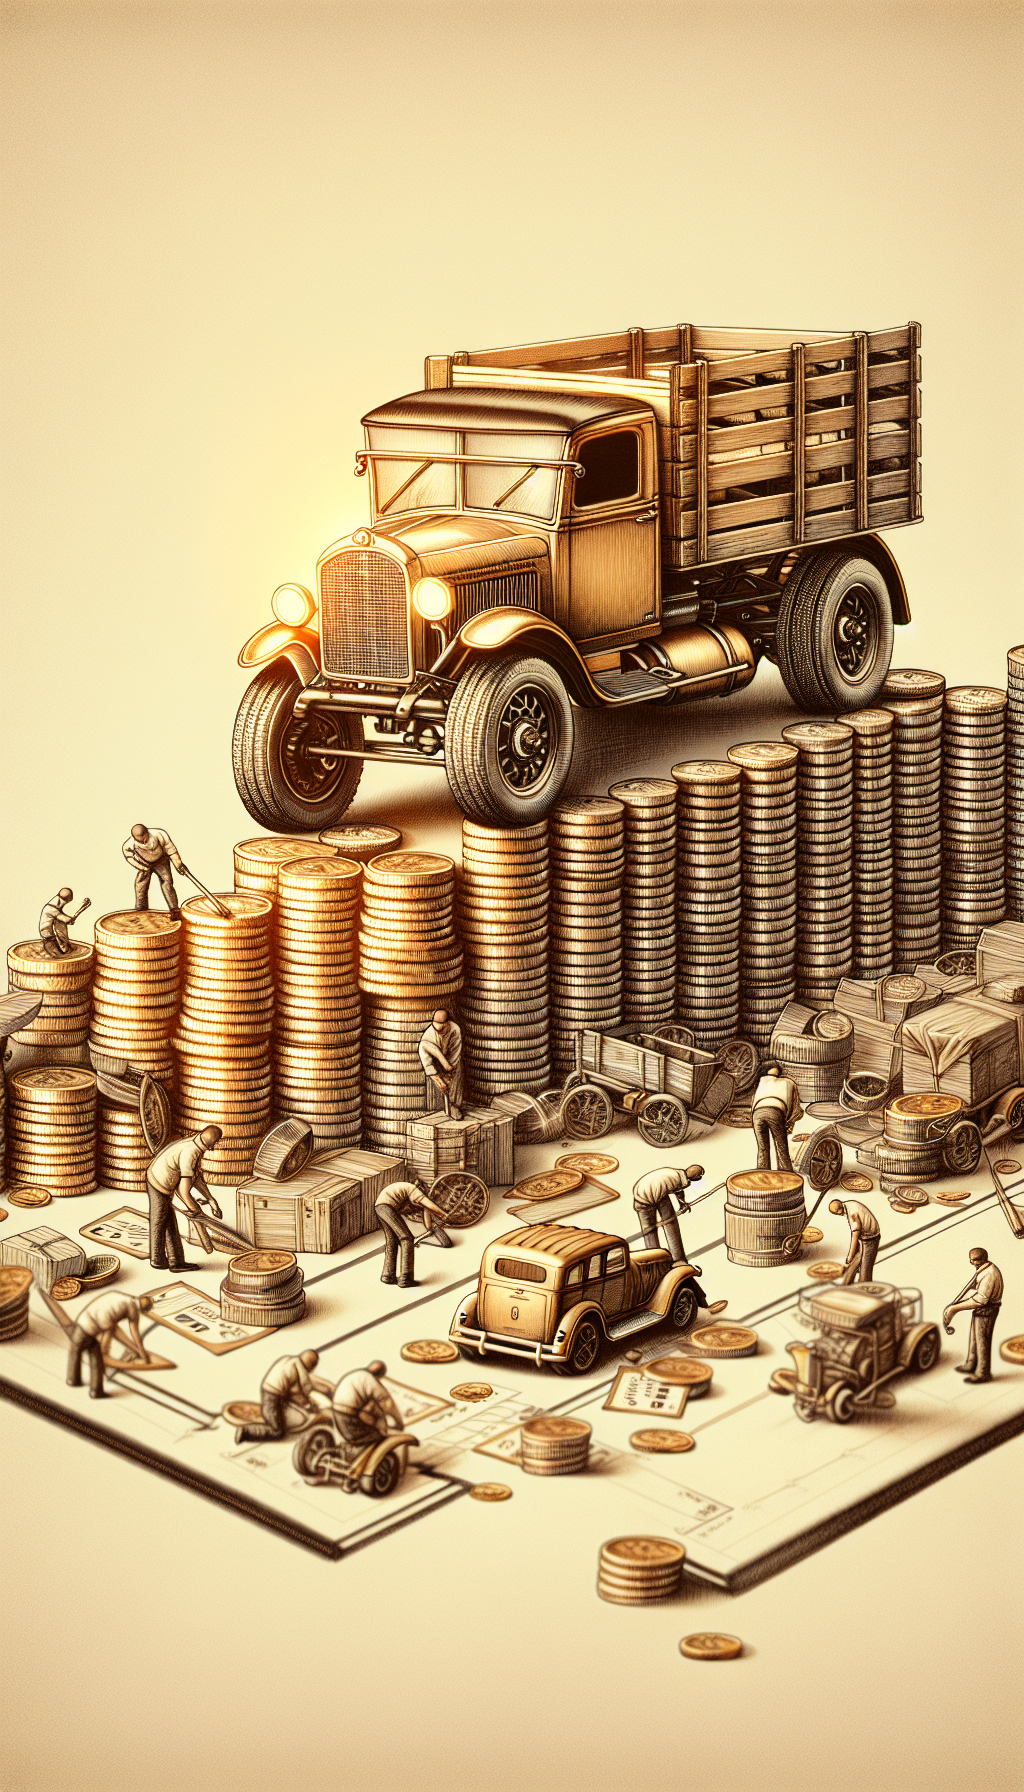 An illustration of a vintage, shiny Tonka truck perched atop a stack of ascending golden coins, resembling a bar chart. Below it, miniature collectors with magnifying glasses and checklists selectively polish and appraise other Tonka models. A faded price tag ribbon swirls around the scene, emphasizing the increasing value. The styles oscillate between sepia-toned realism for the truck and vibrant, cartoonish lines for the collectors.